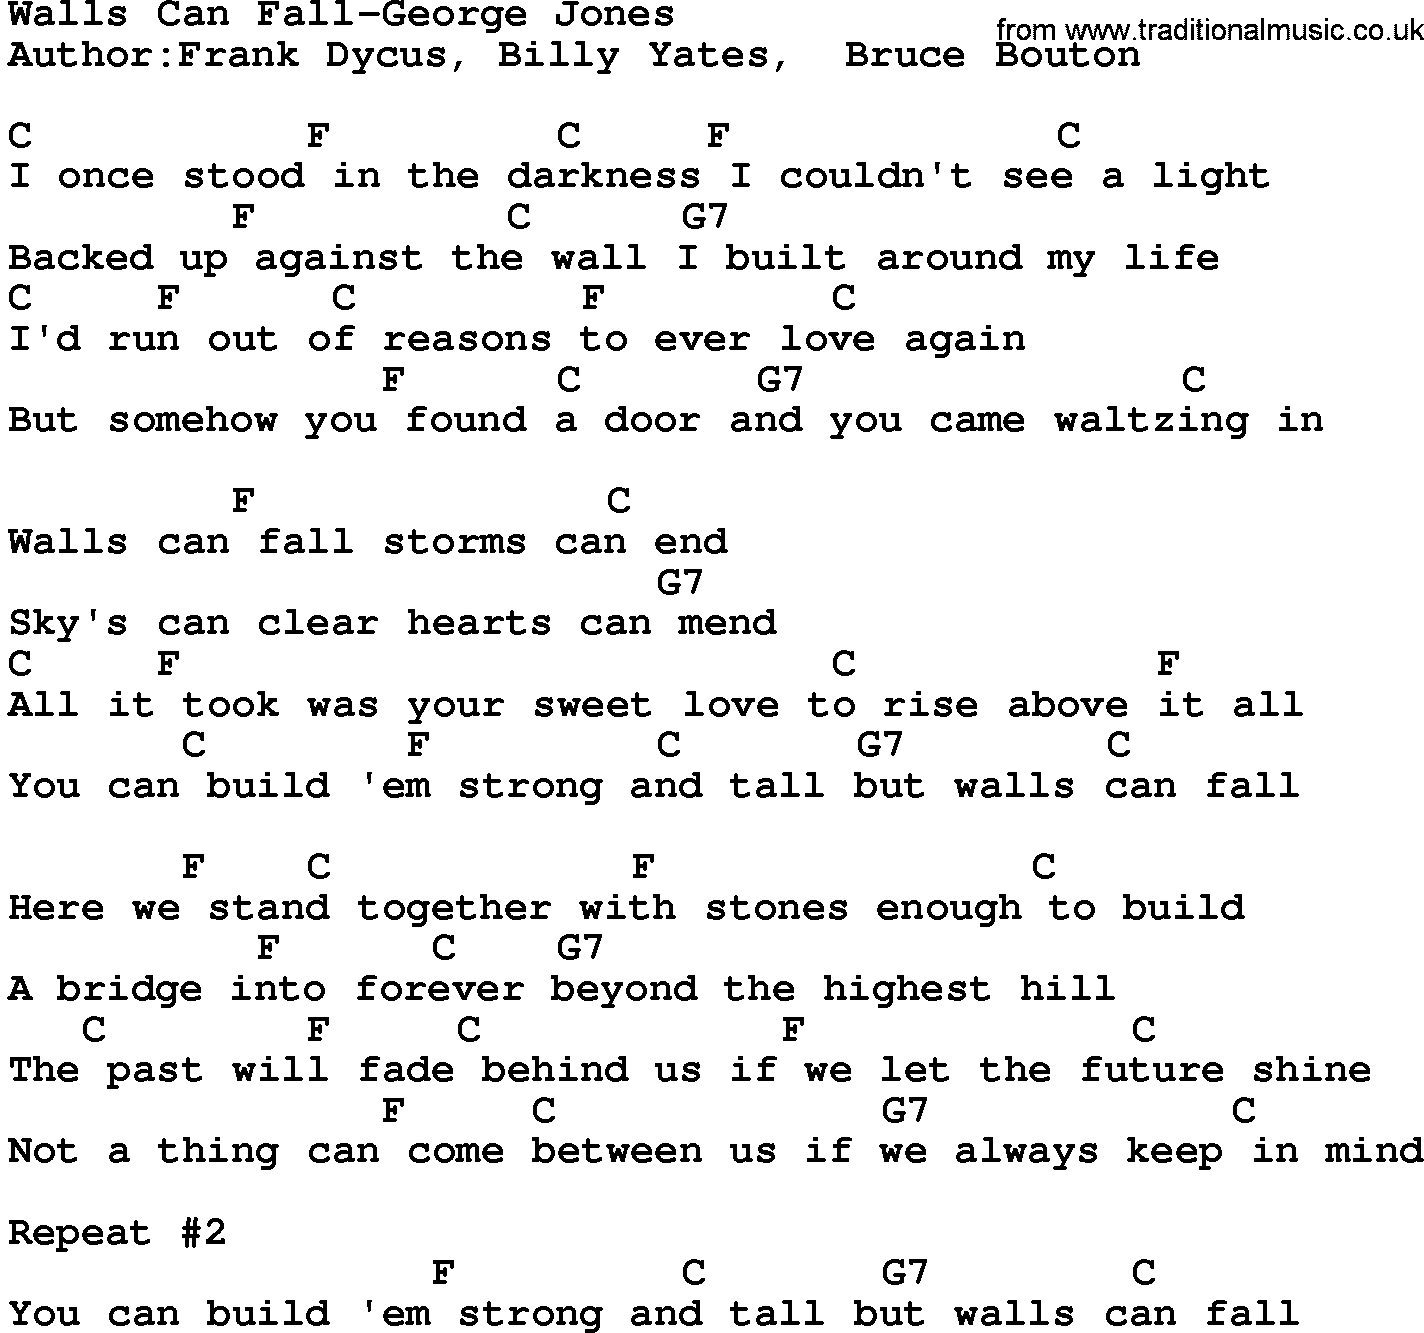 Country music song: Walls Can Fall-George Jones lyrics and chords